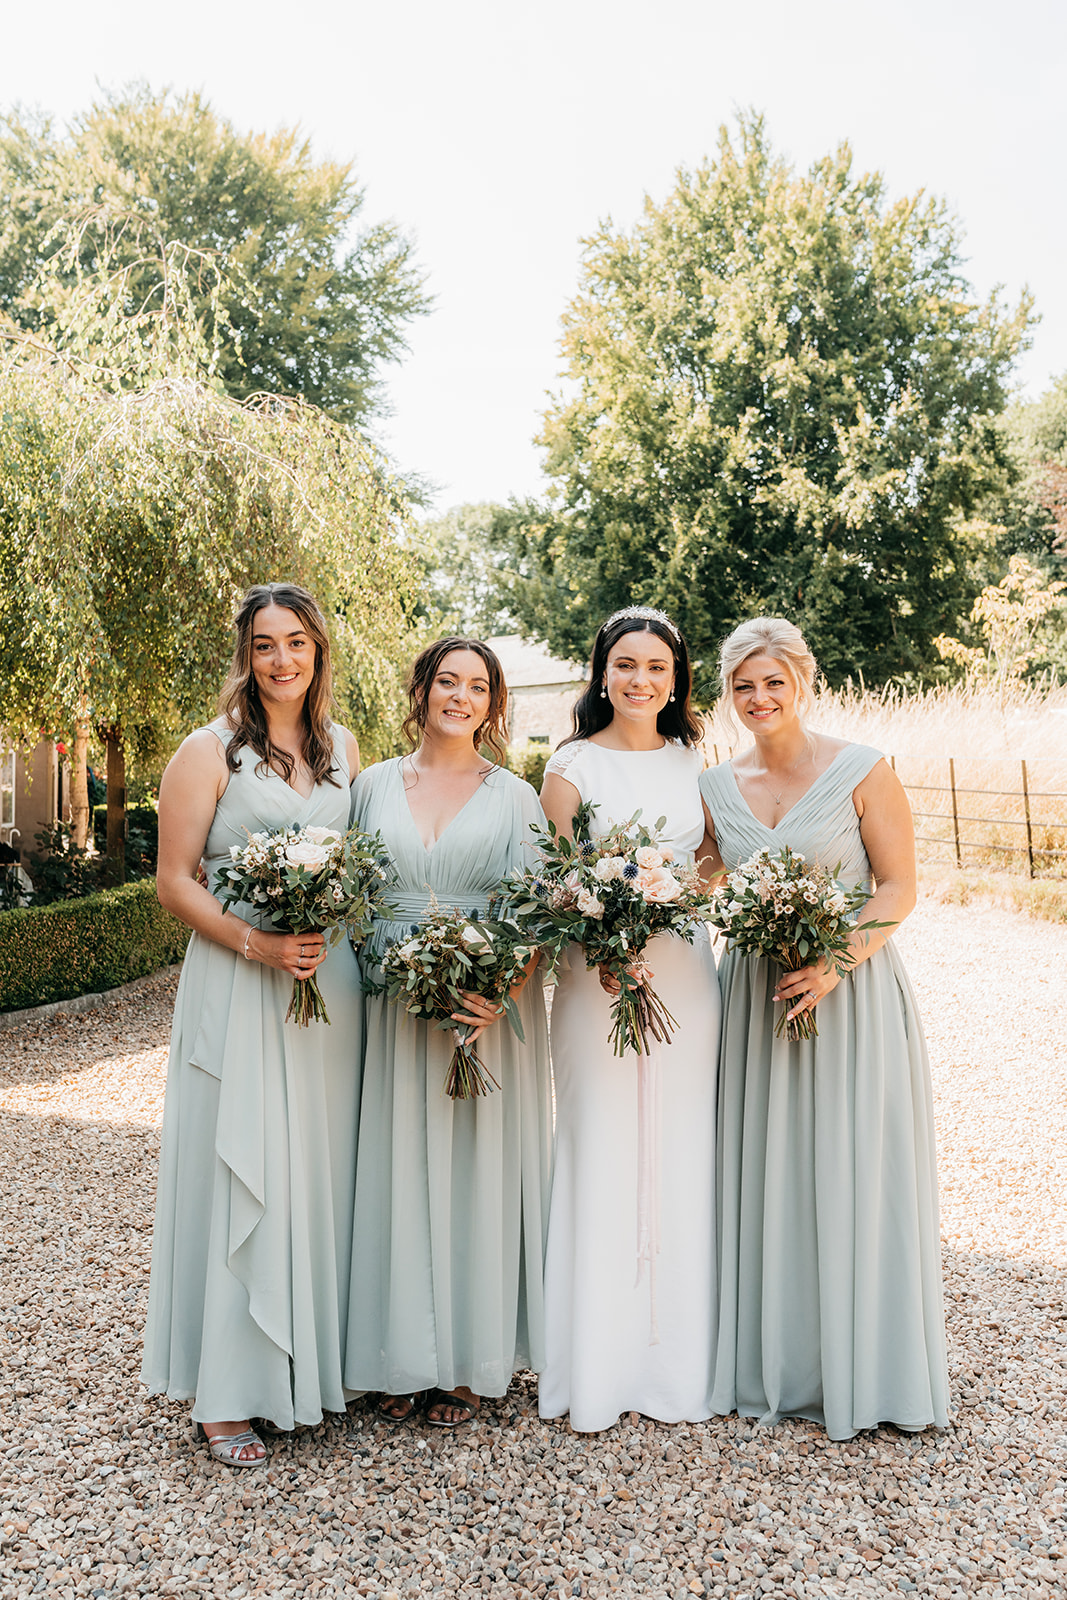 The bridesmaids and bride looking beautiful in their gowns